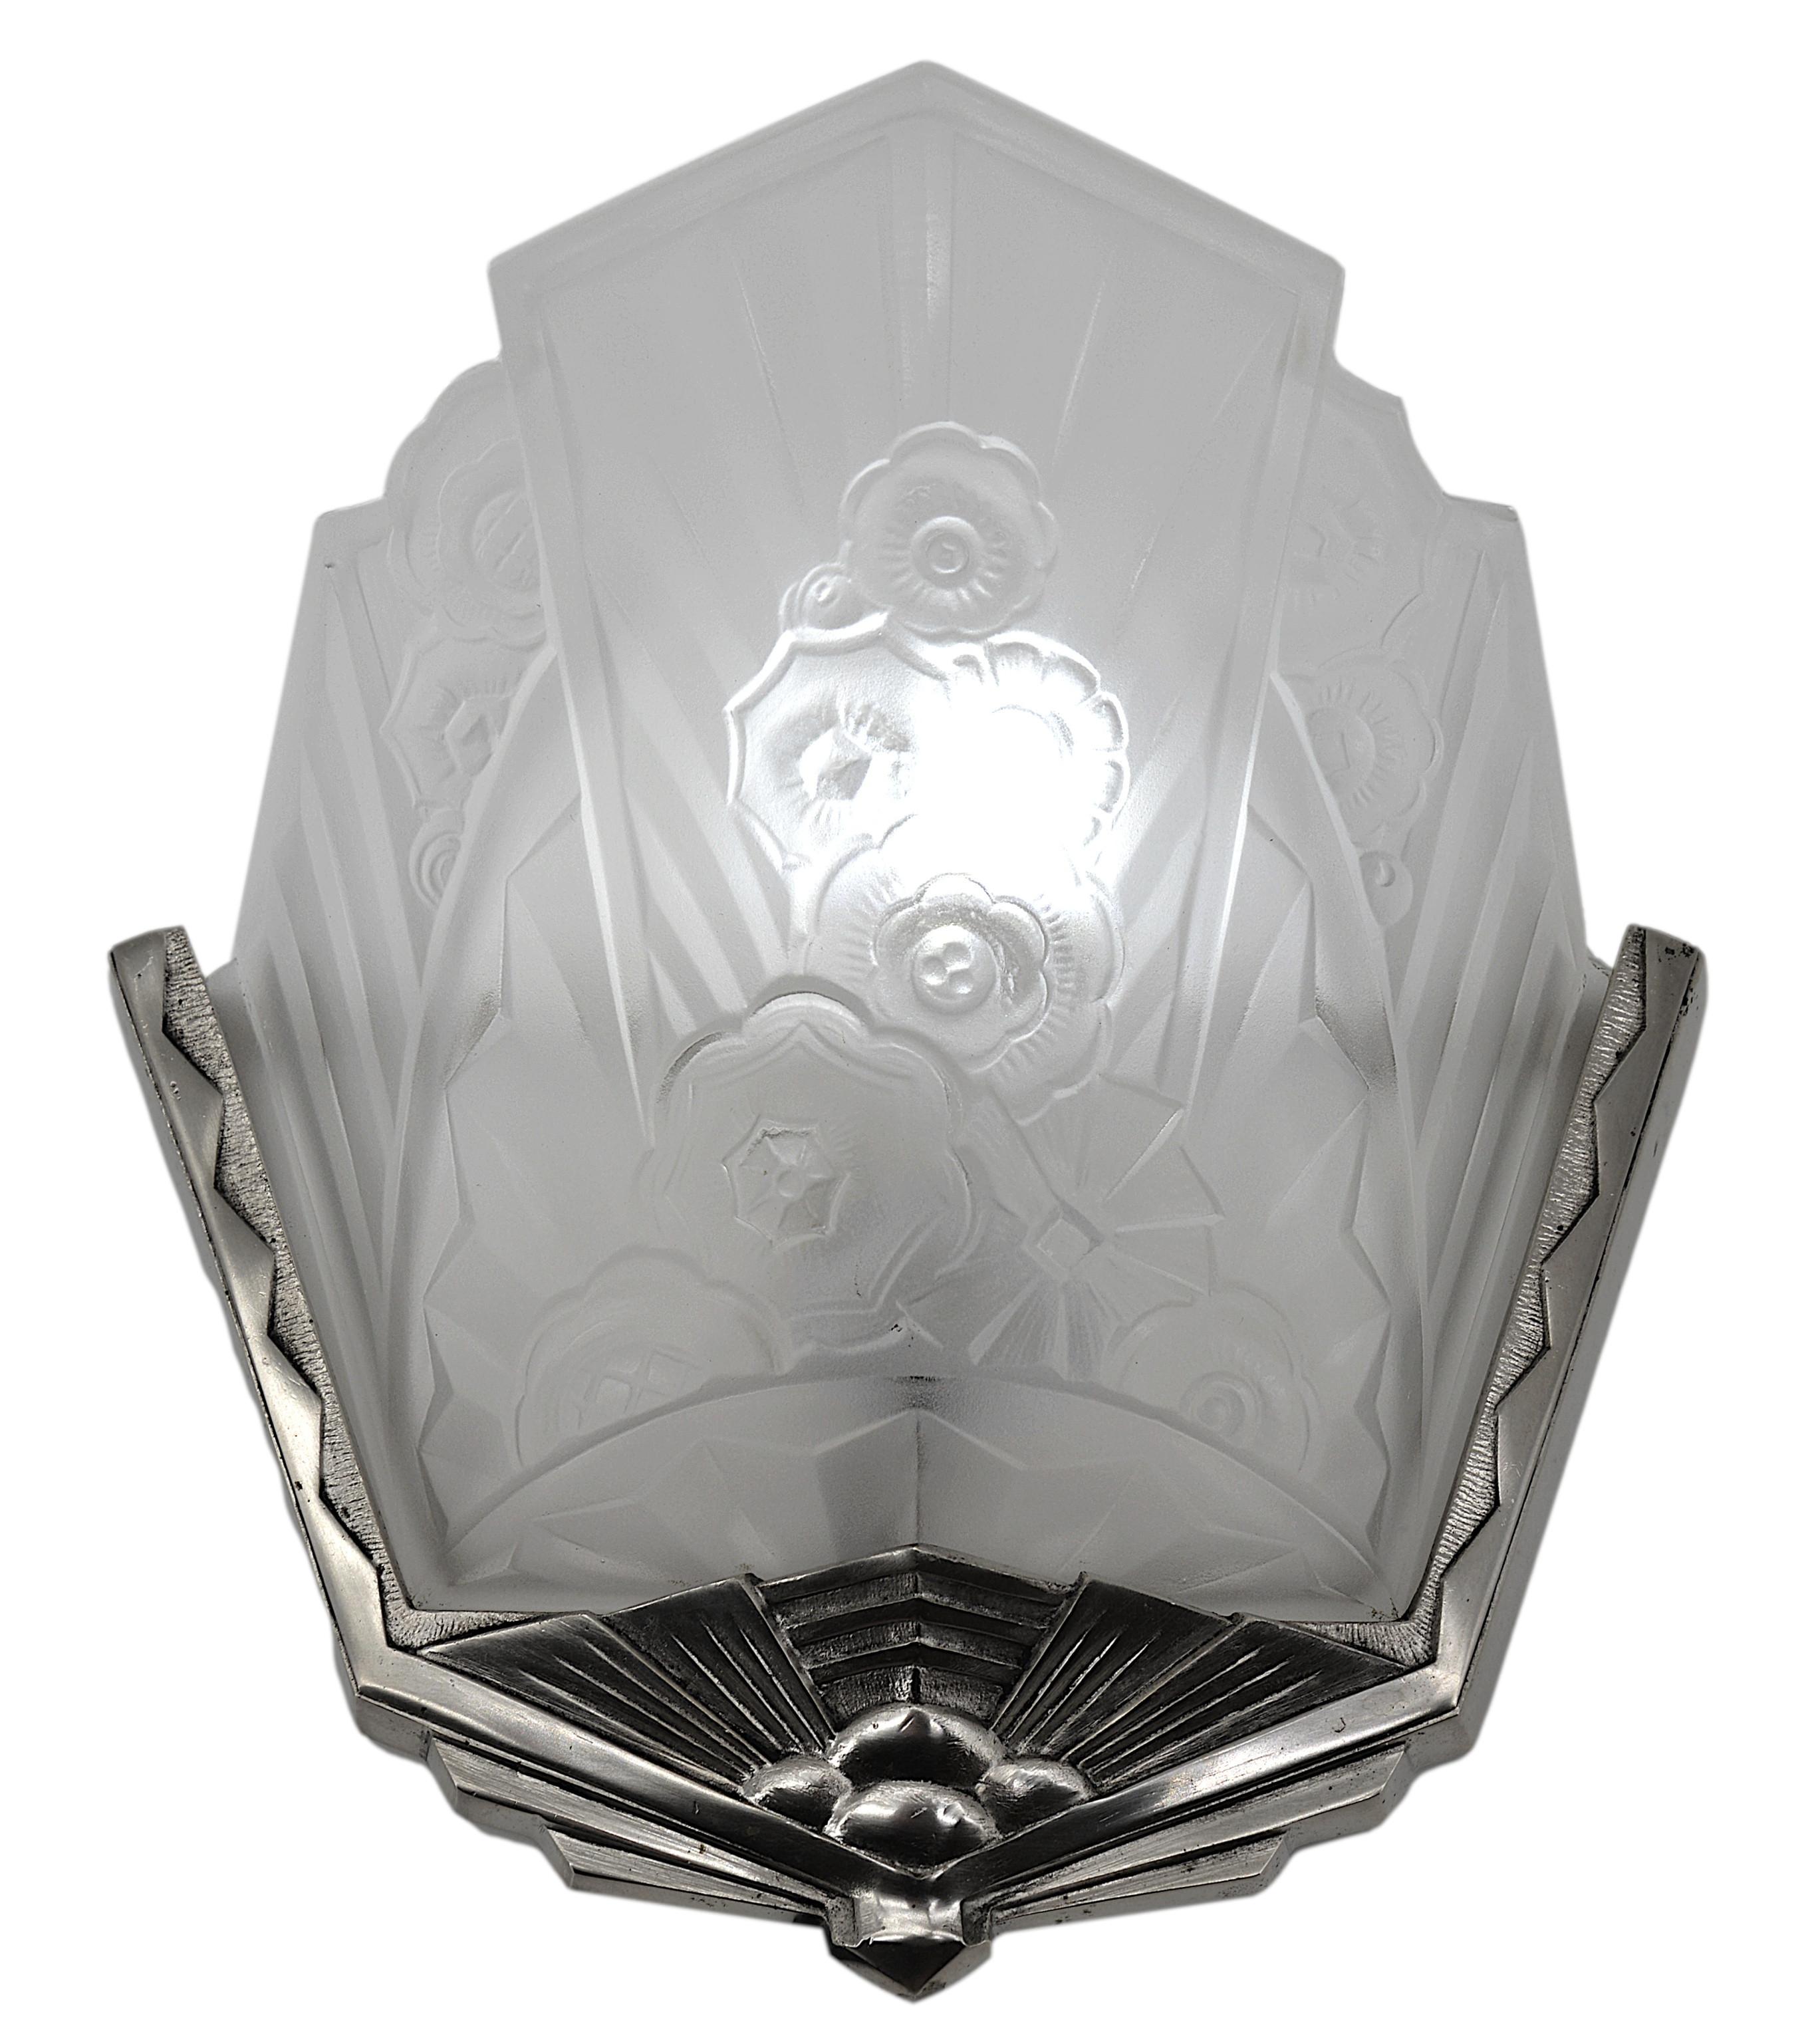 Up to 3 French Art Deco wall sconces by Jean Gauthier, (Paris), 12-14 rue Jean Robert, Paris 18e, France, 1920s. Frosted molded glass shade in its silverplate bronze fixture. Measures: Each - Width : 9.25